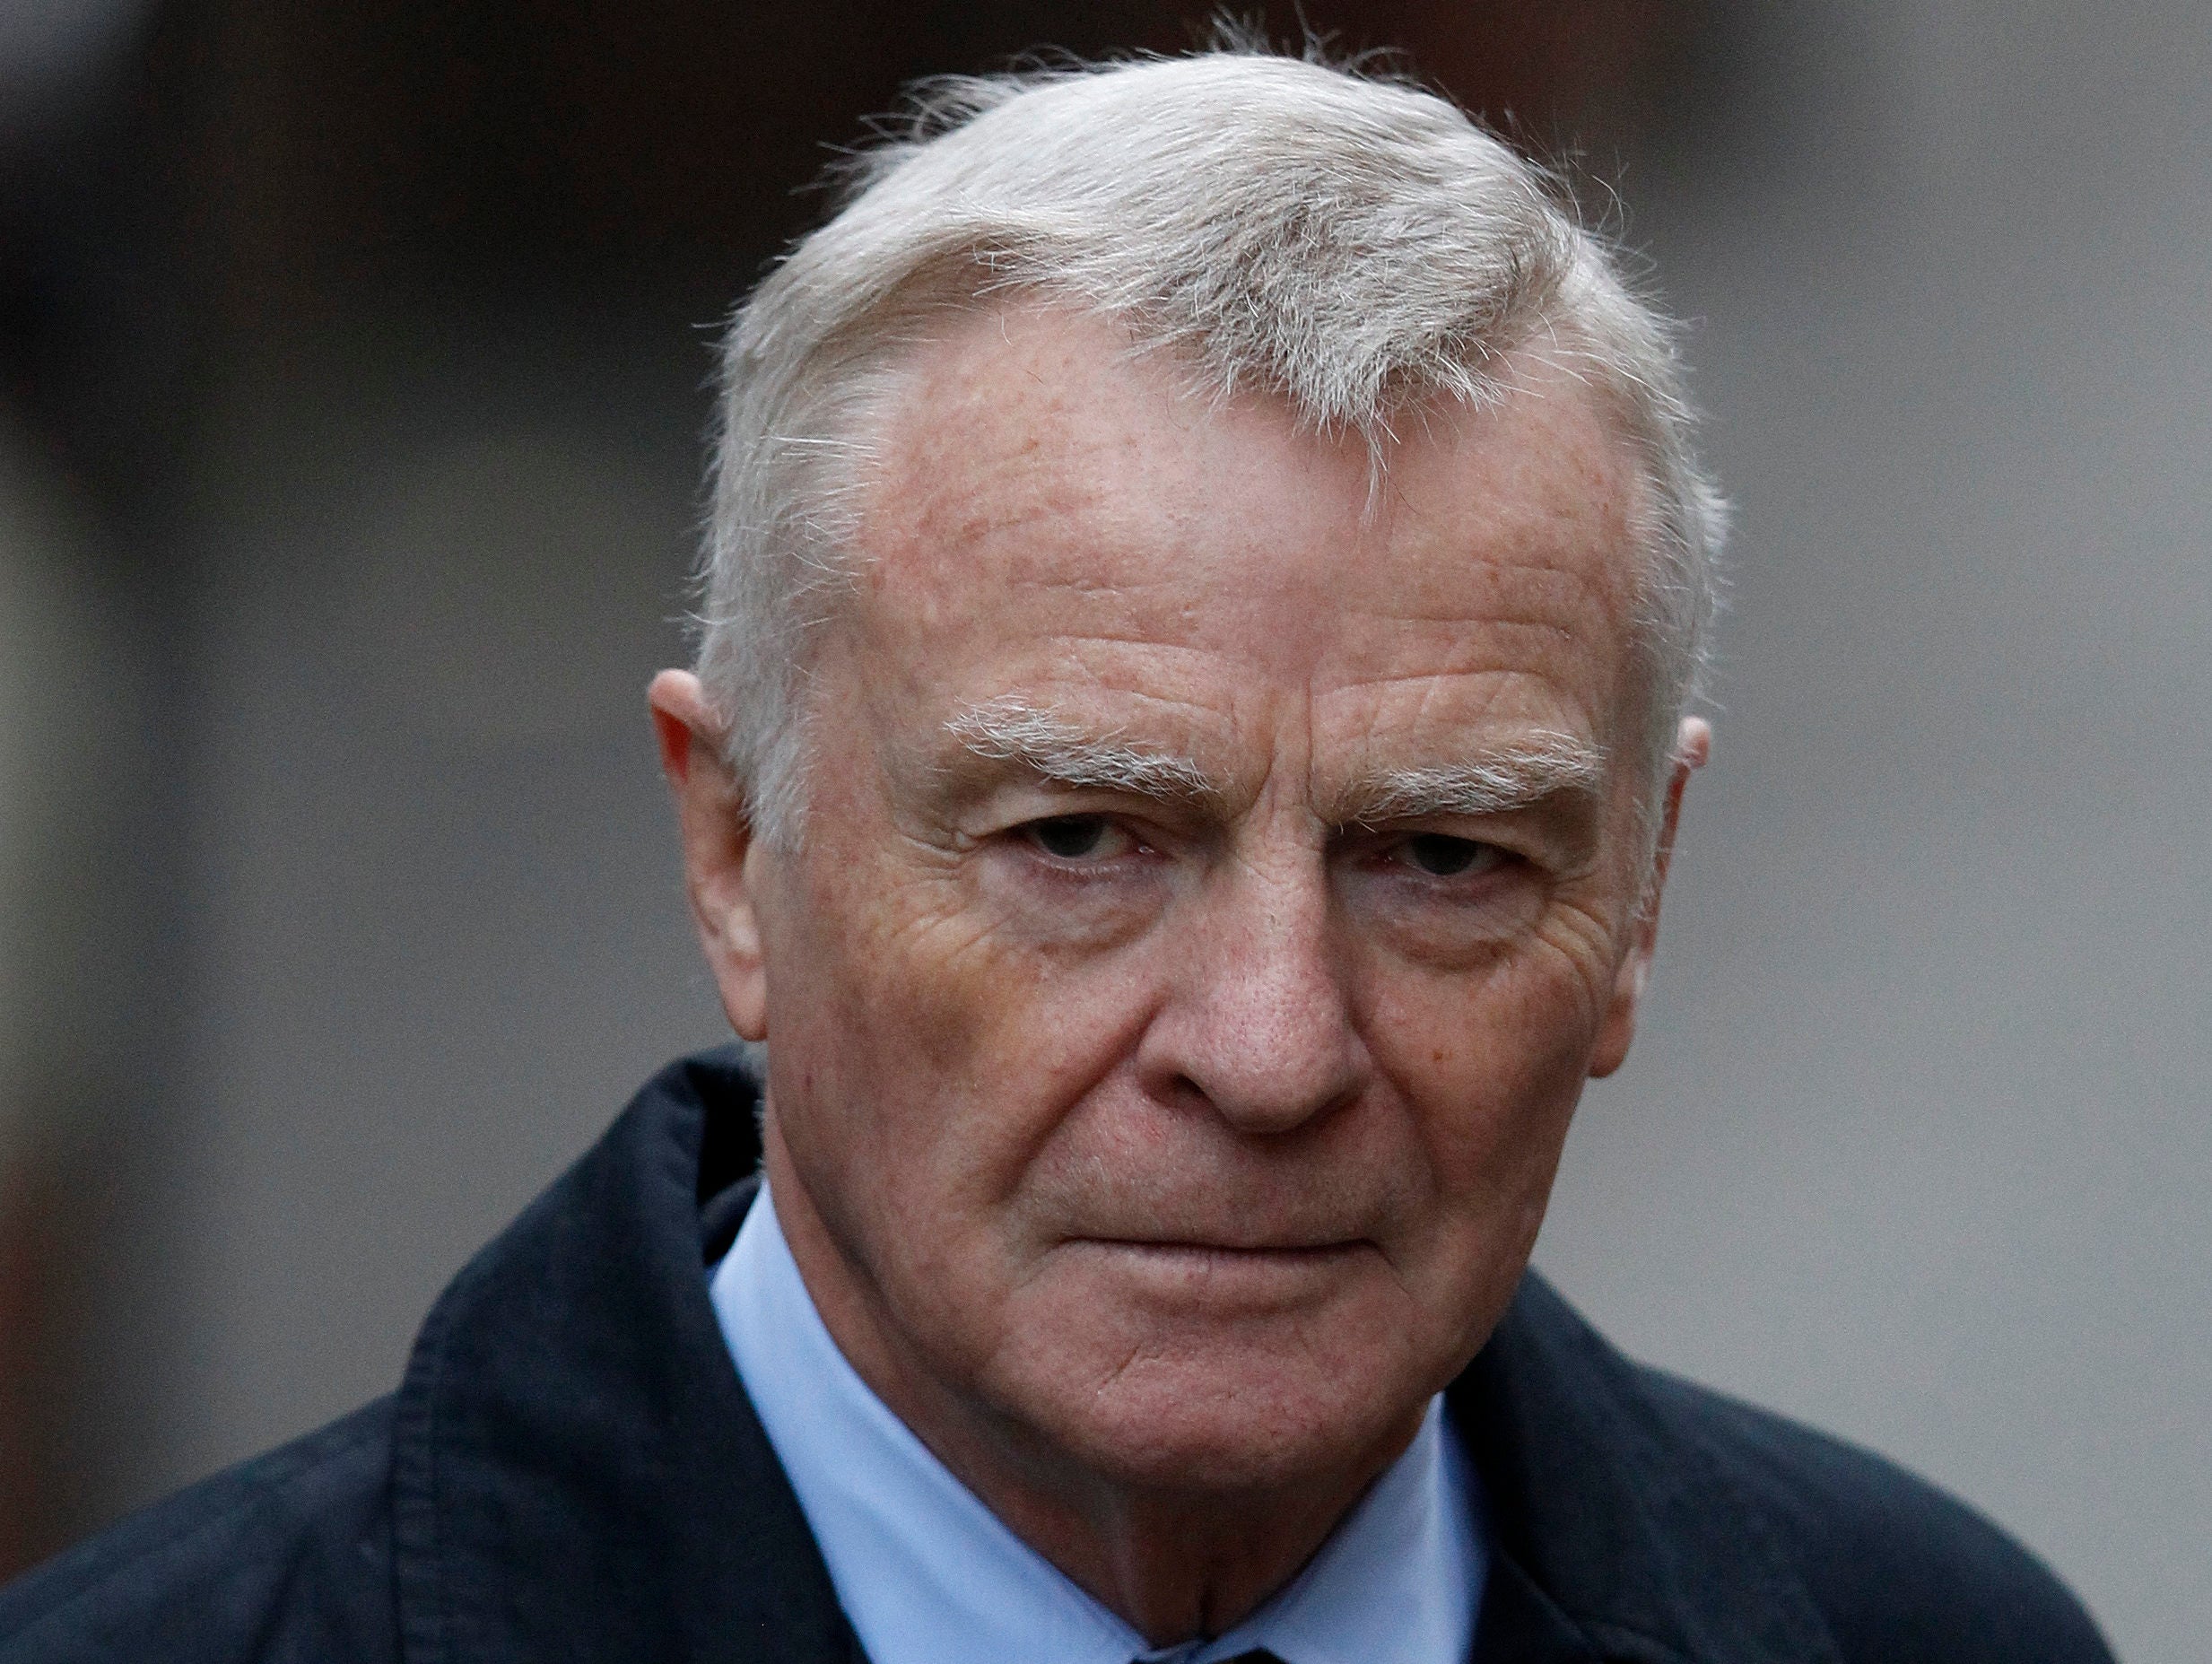 Max Mosley: Newspapers' repeated references to orgy story are attempt to 'smear me and Impress by association'